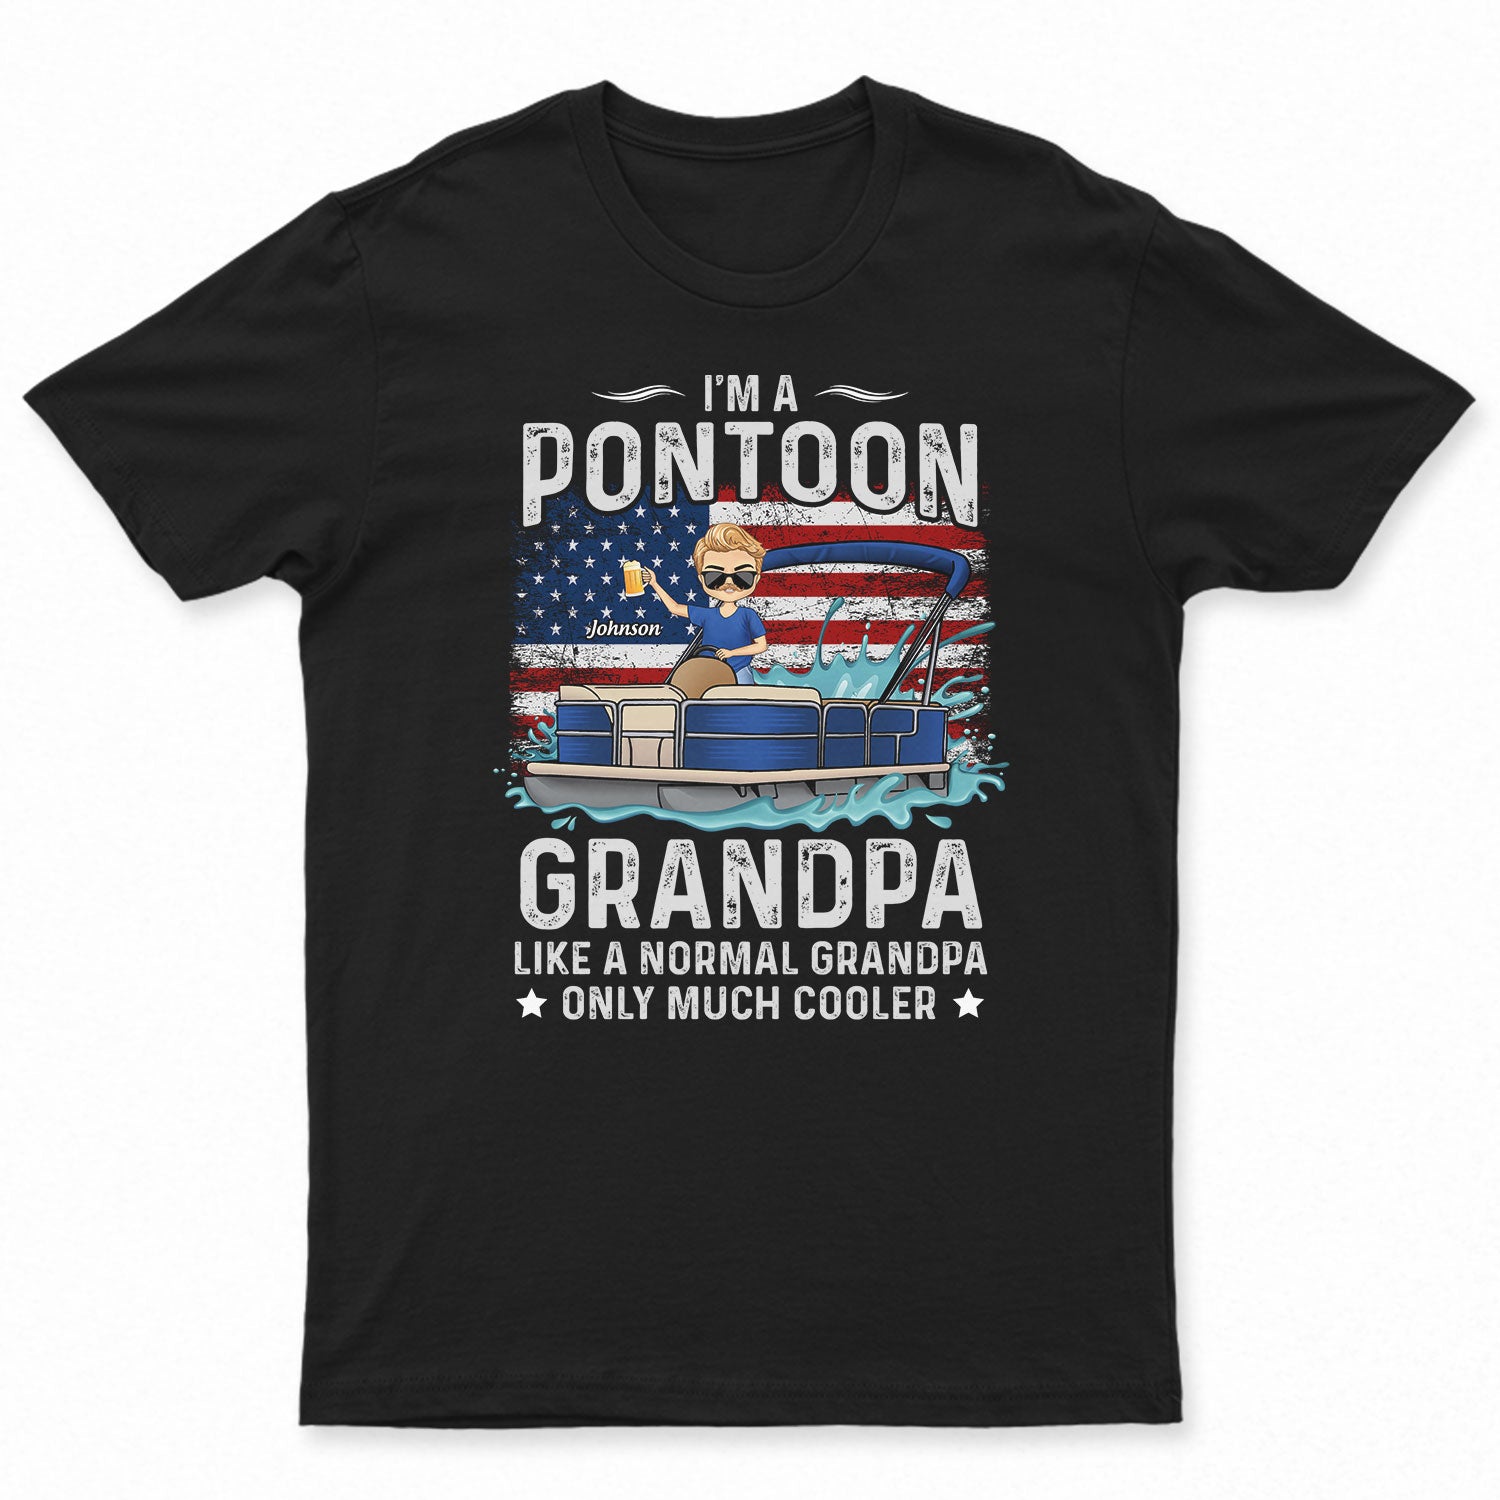 Stars & Stripes, I'm A Pontoon Dad Grandpa - Gift For Grandfather, Father, Traveling Lovers - Personalized T Shirt